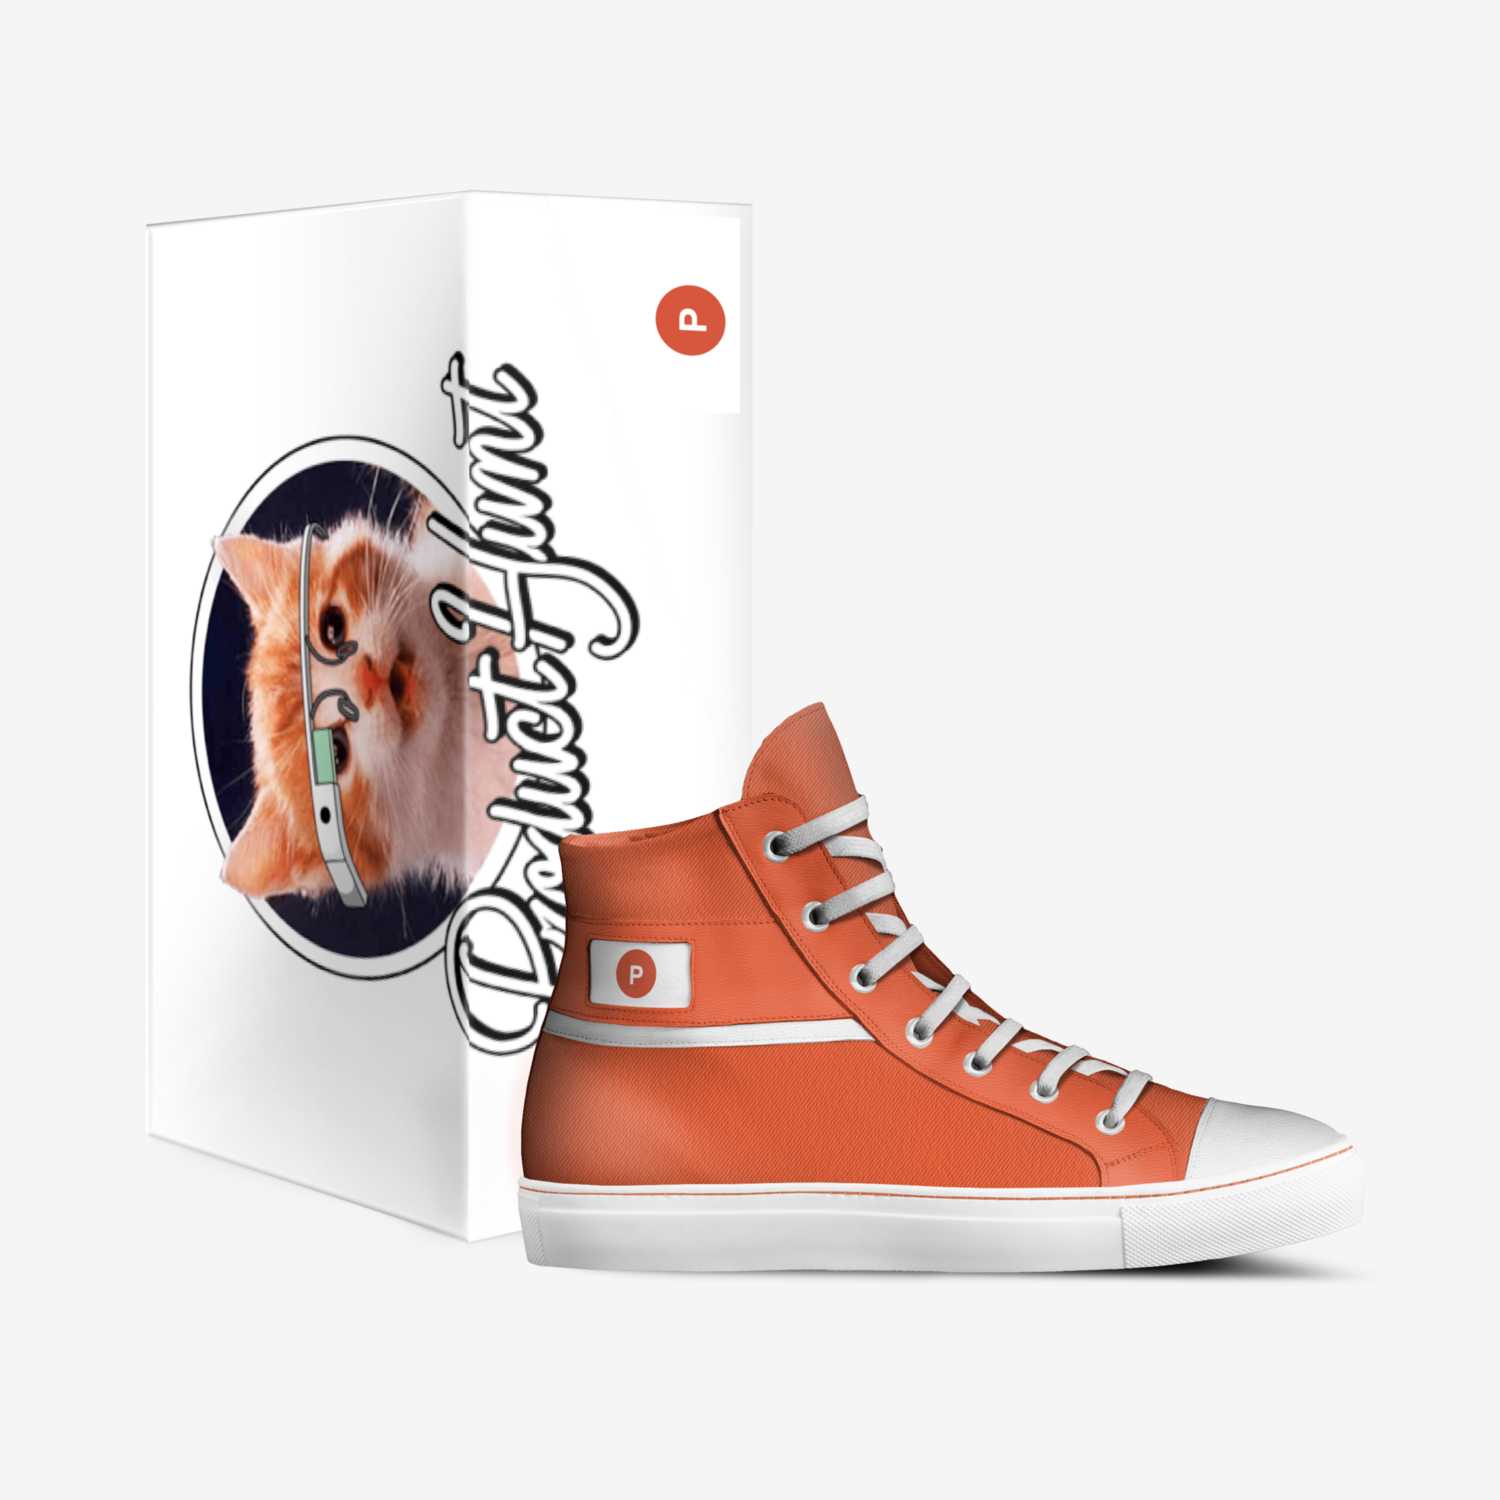 Product hunt kicks custom made in Italy shoes by Luca Botticelli | Box view